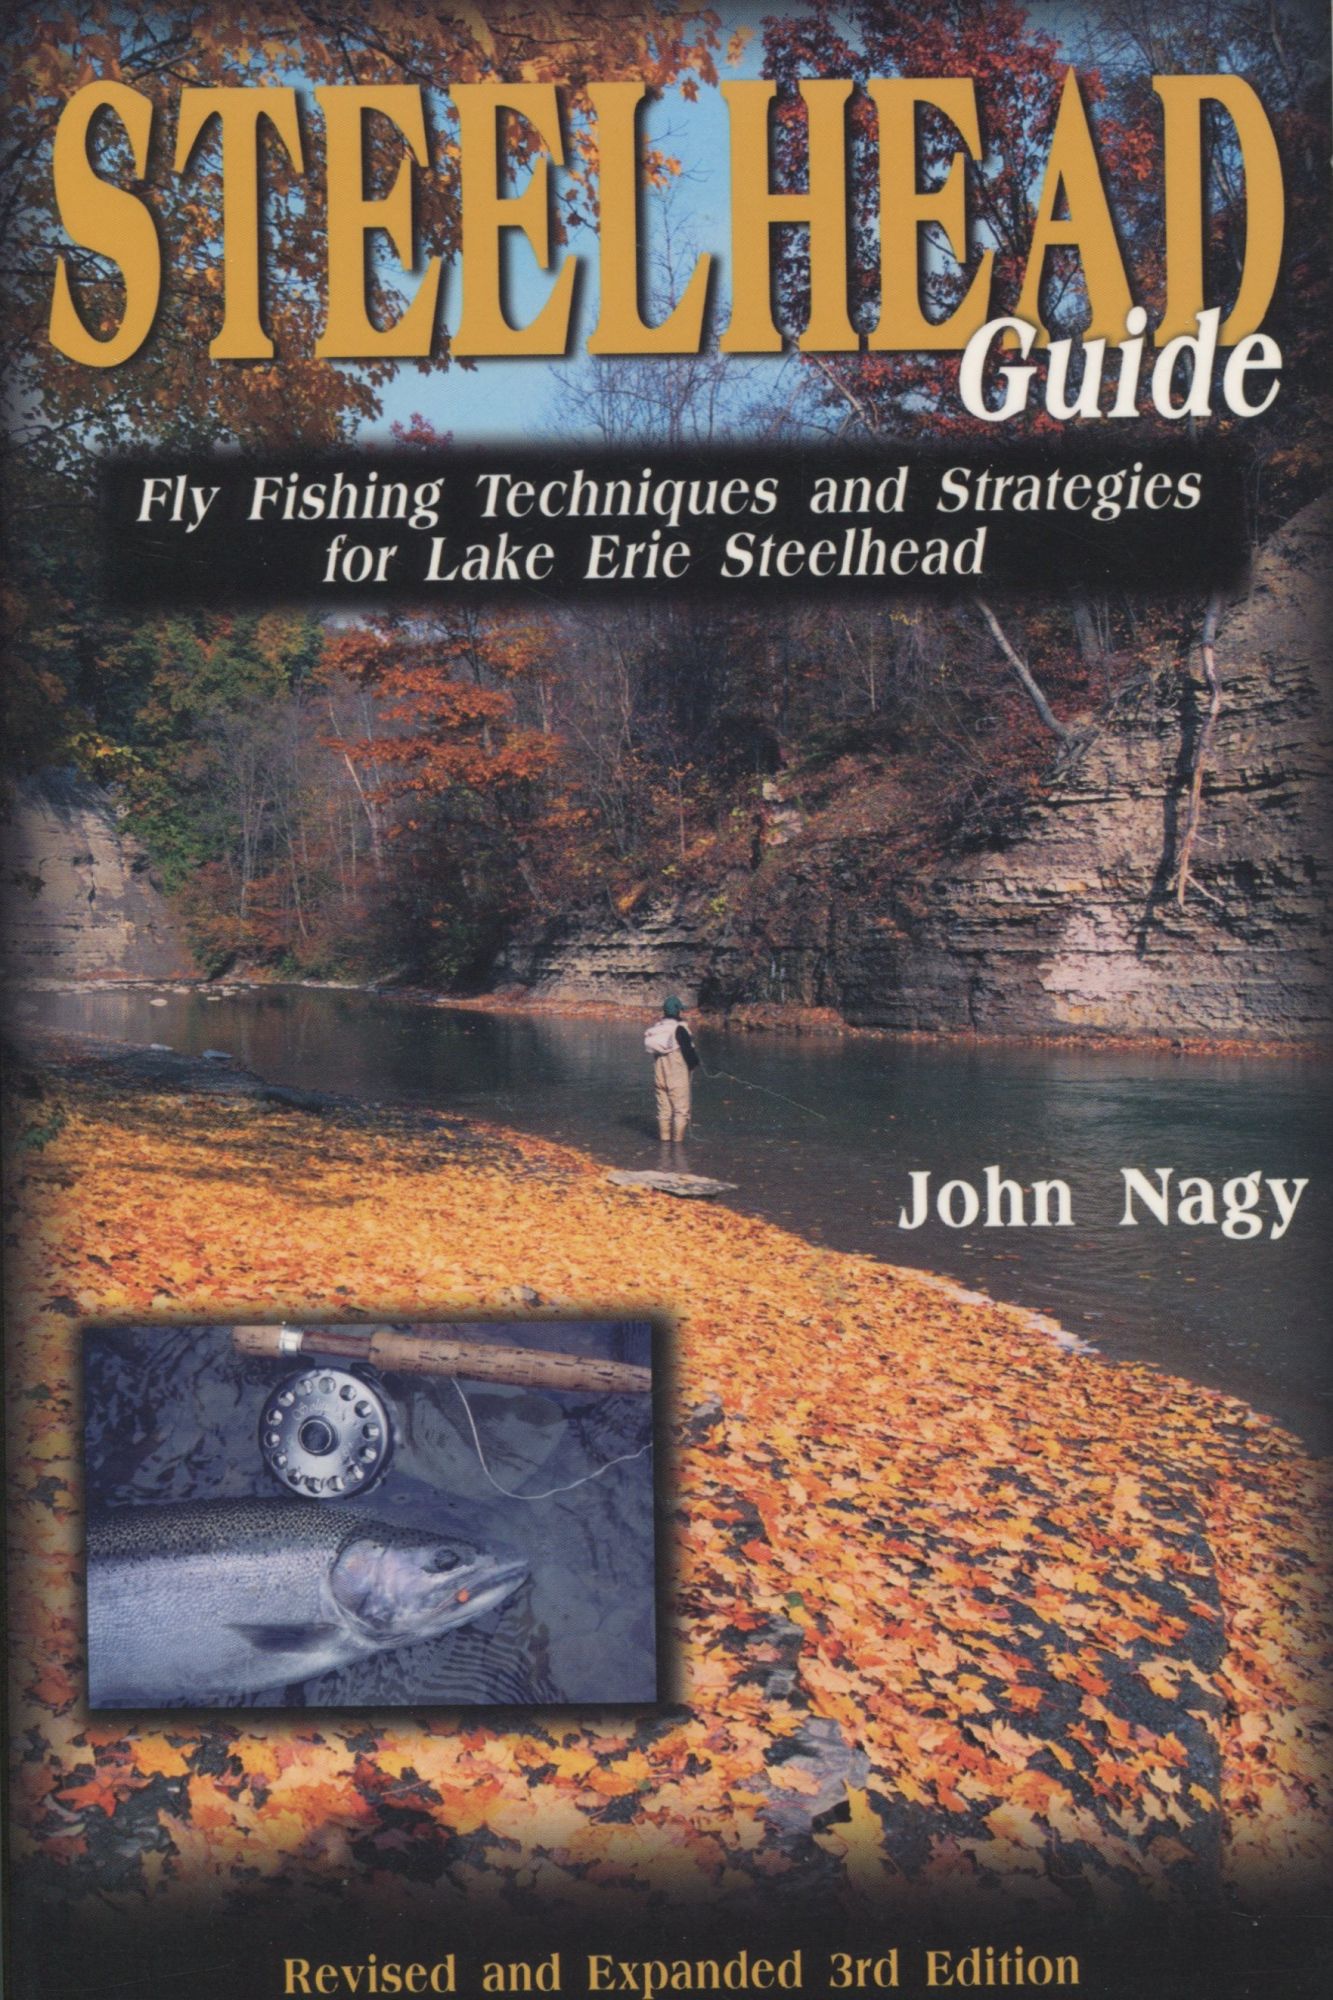 Steelhead Guide: Revised and Expanded Third Edition; fly fishing techniques  and strategies for Lake Erie steelhead, John Nagy